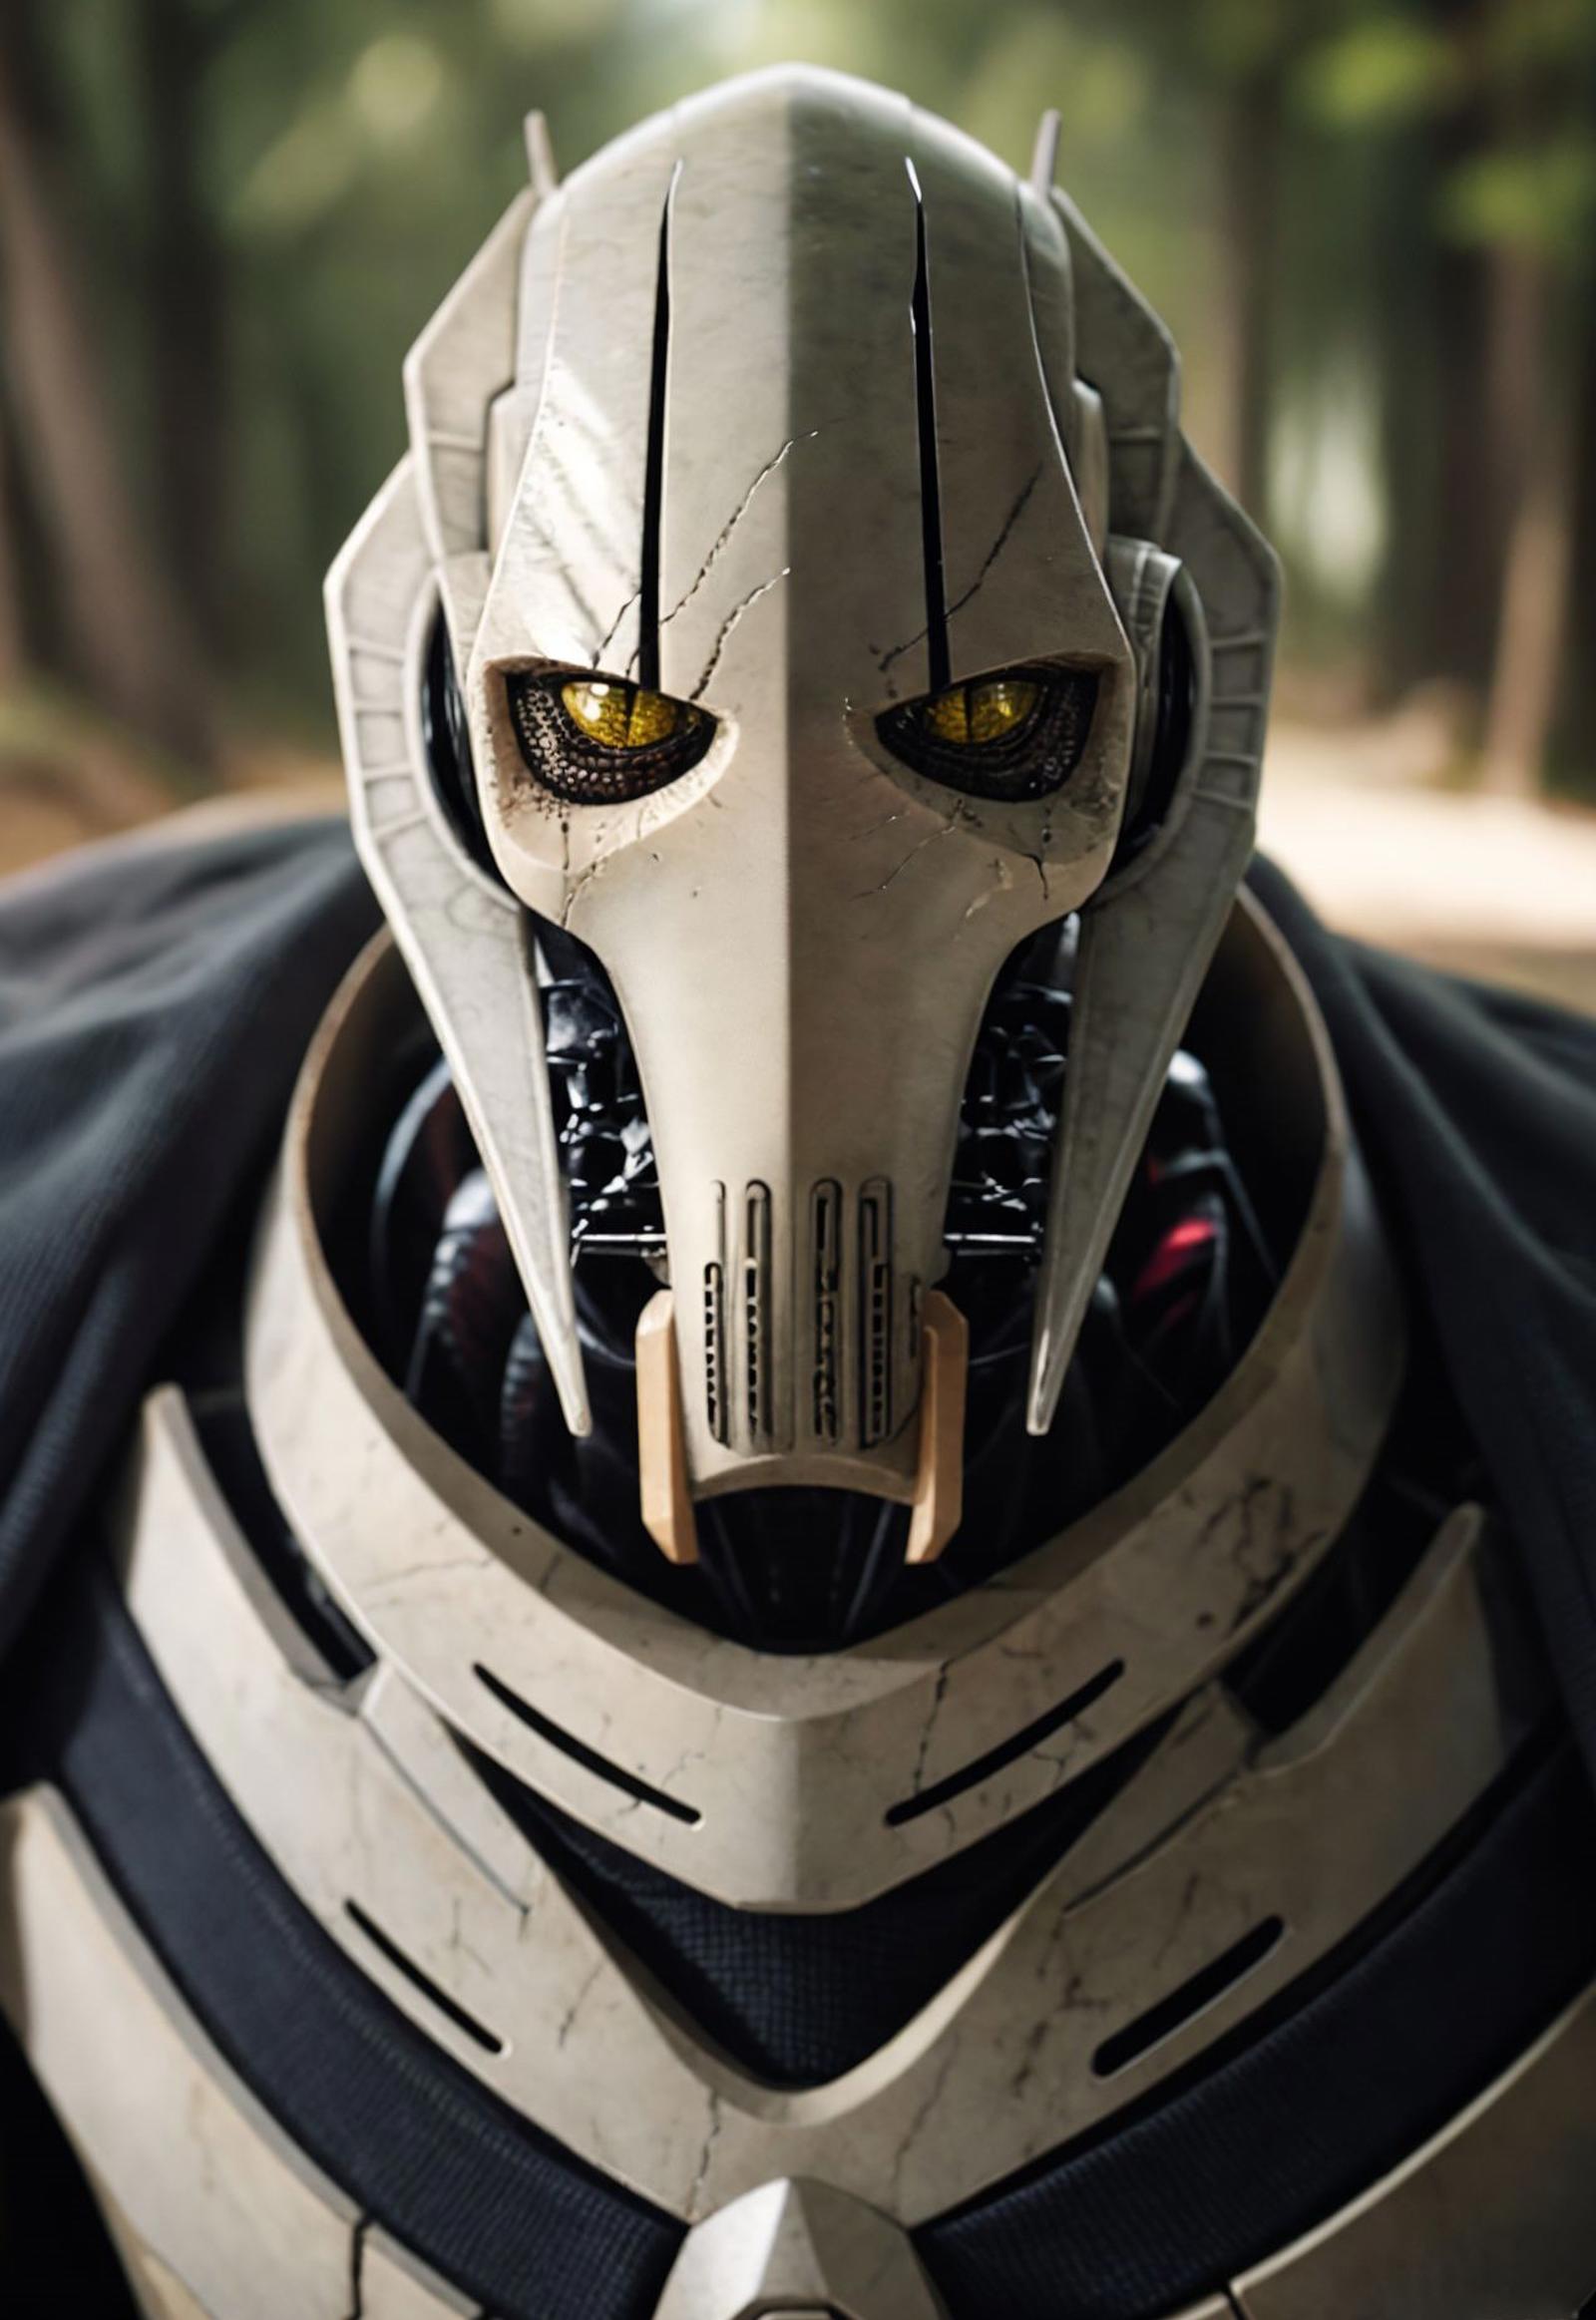 General Grievous - Star Wars image by ThetAI